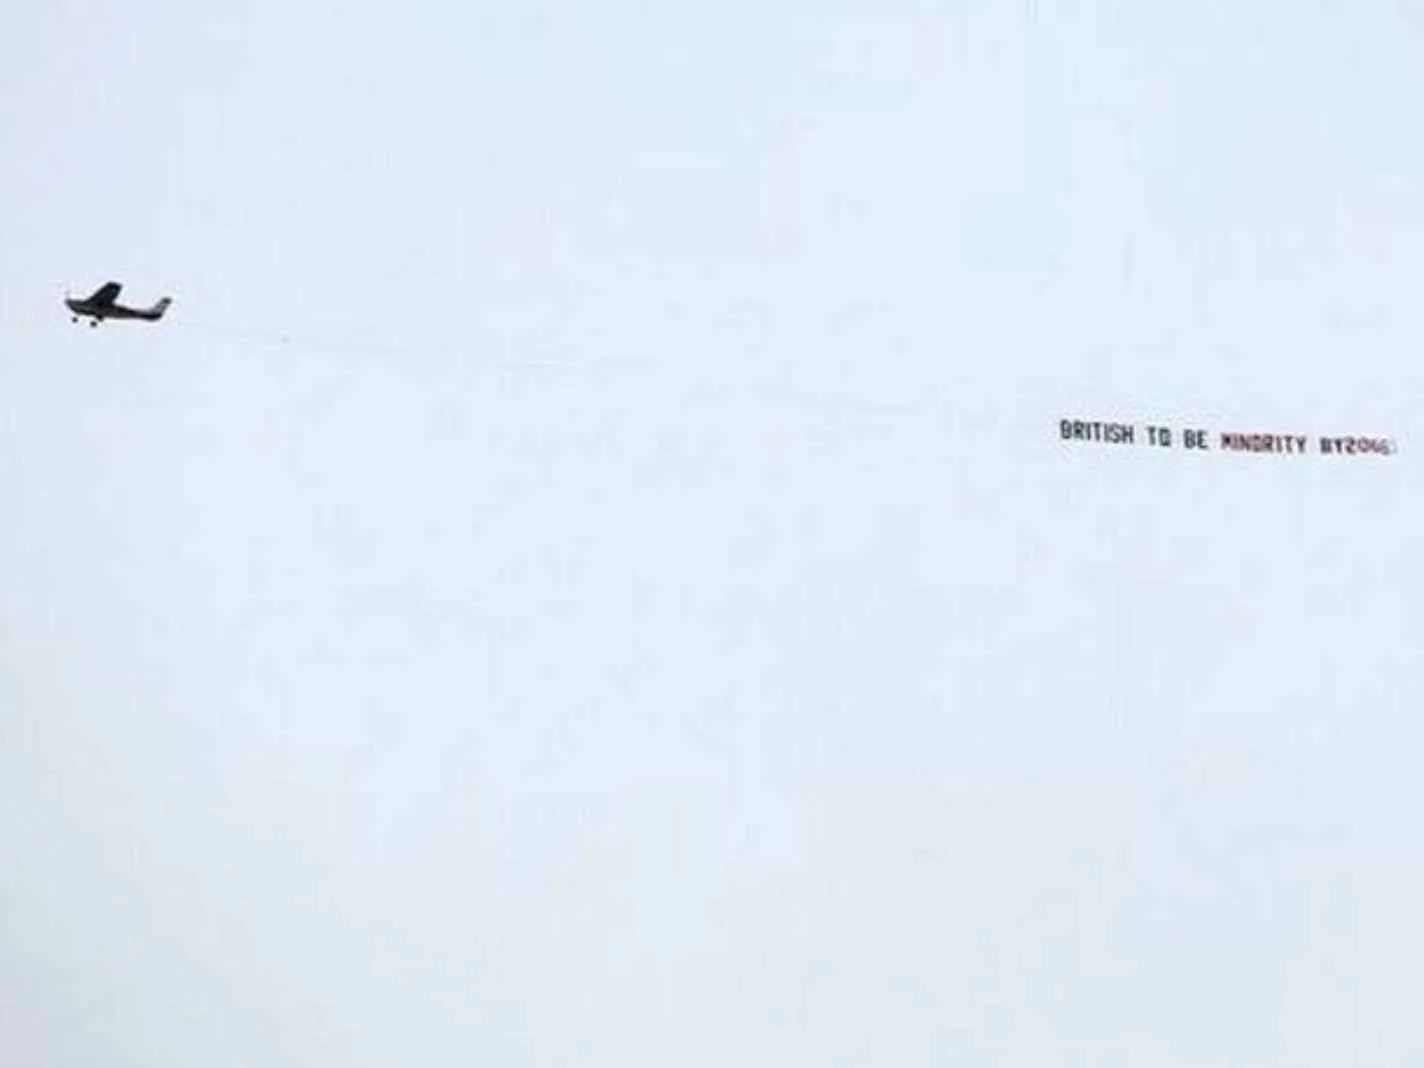 Football fans left in disgust after spotting air banner which read British to be minority by 2066 during Manchester City's clash against Liverpool